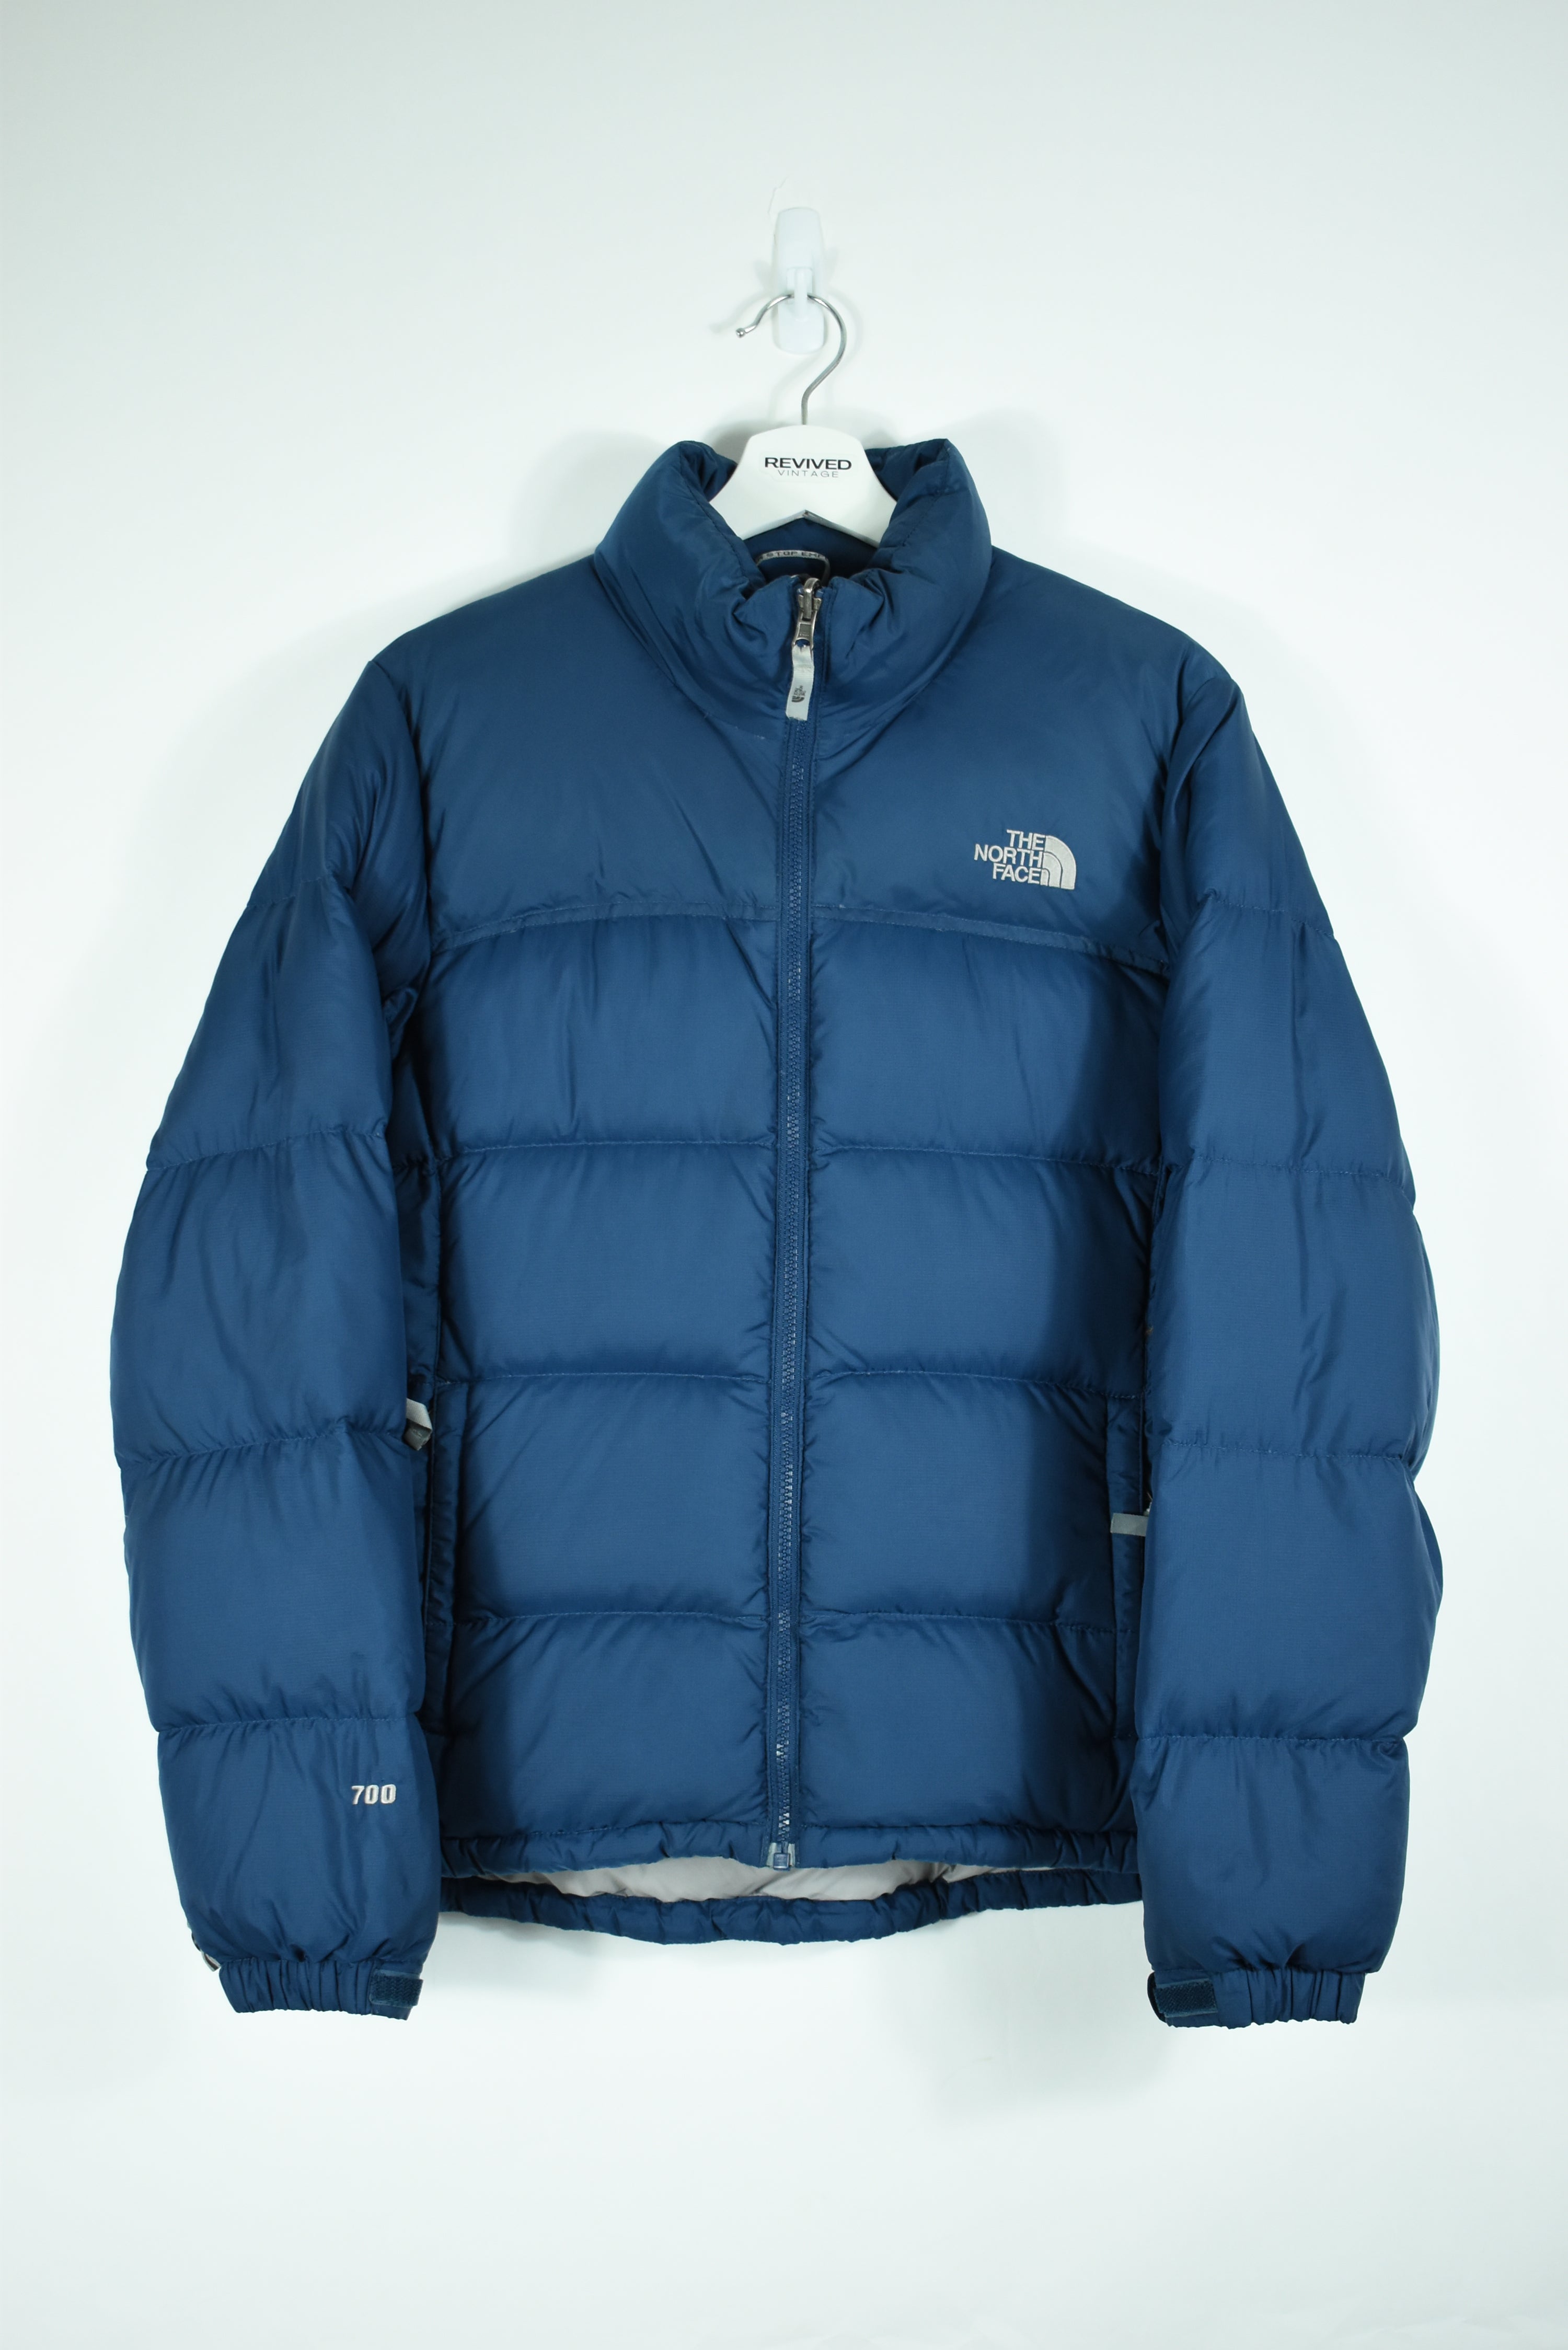 Vintage North Face Navy Puffer 700 Womens LARGE